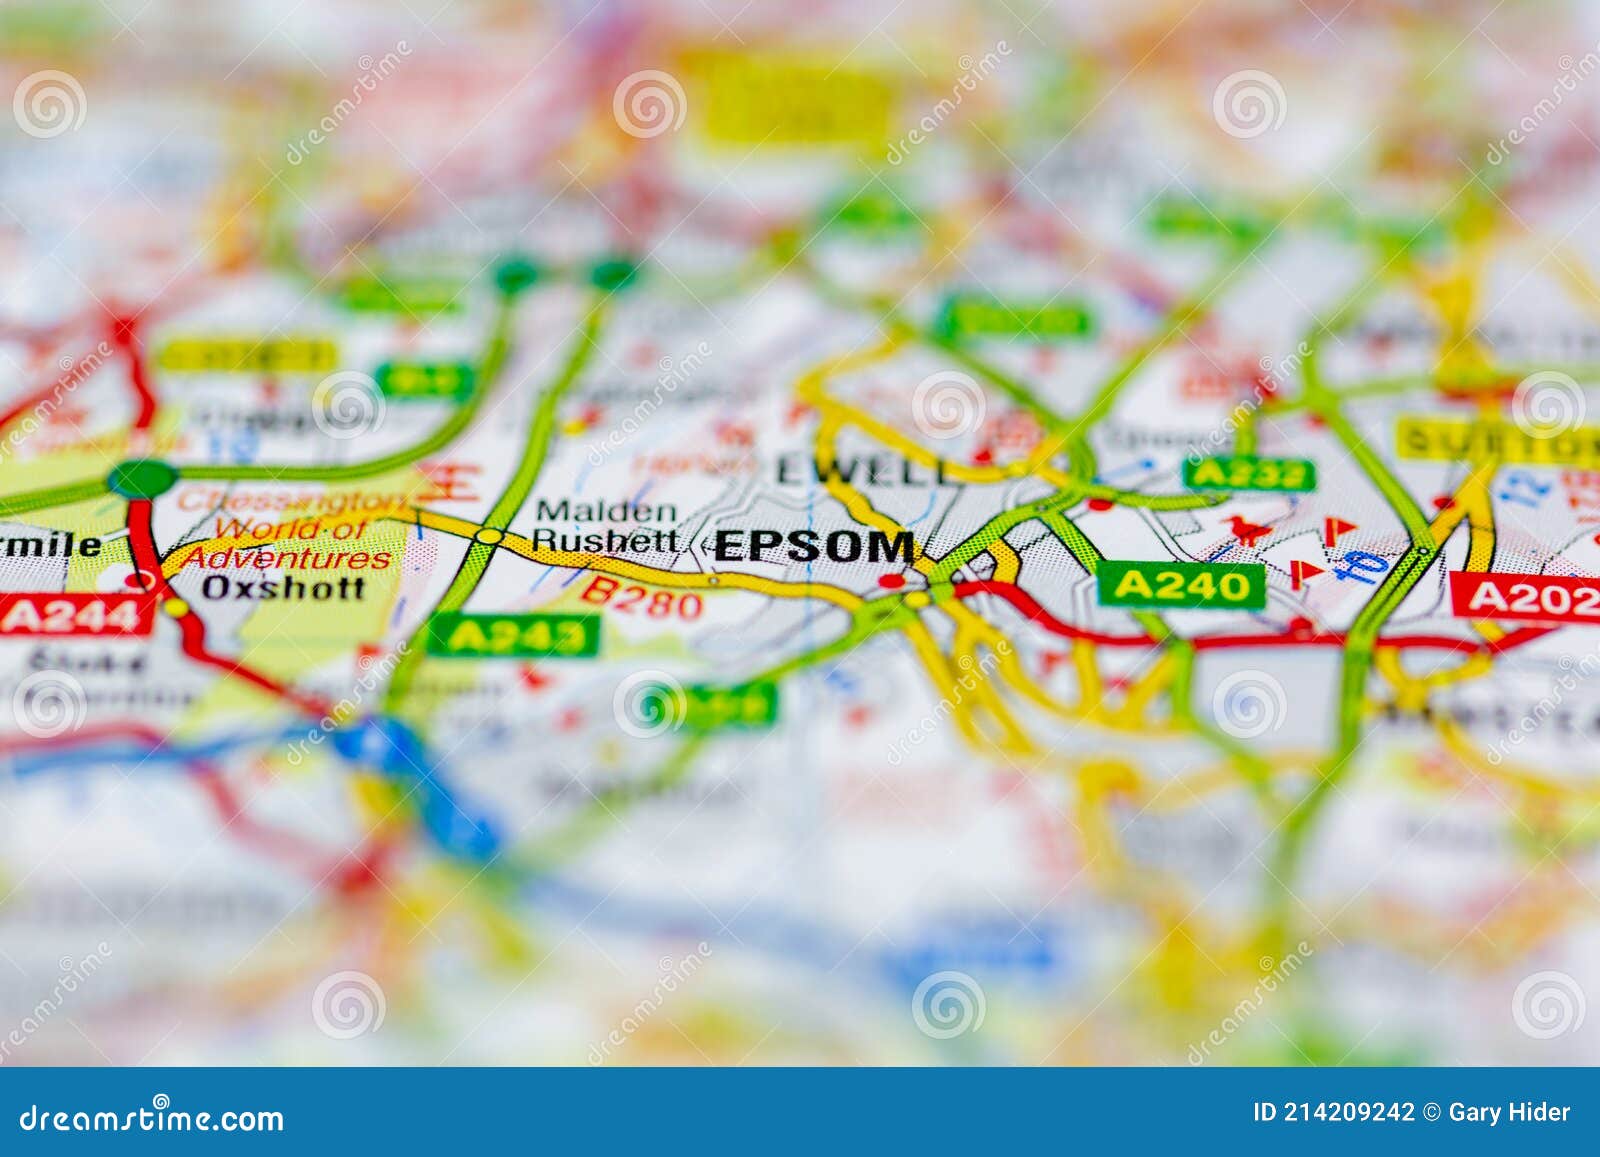 Portsmouth Hampshire Uk Epsom Shown Geography Map Road Map Portsmouth Hampshire Uk Epsom Shown Geography Map Road 214209242 